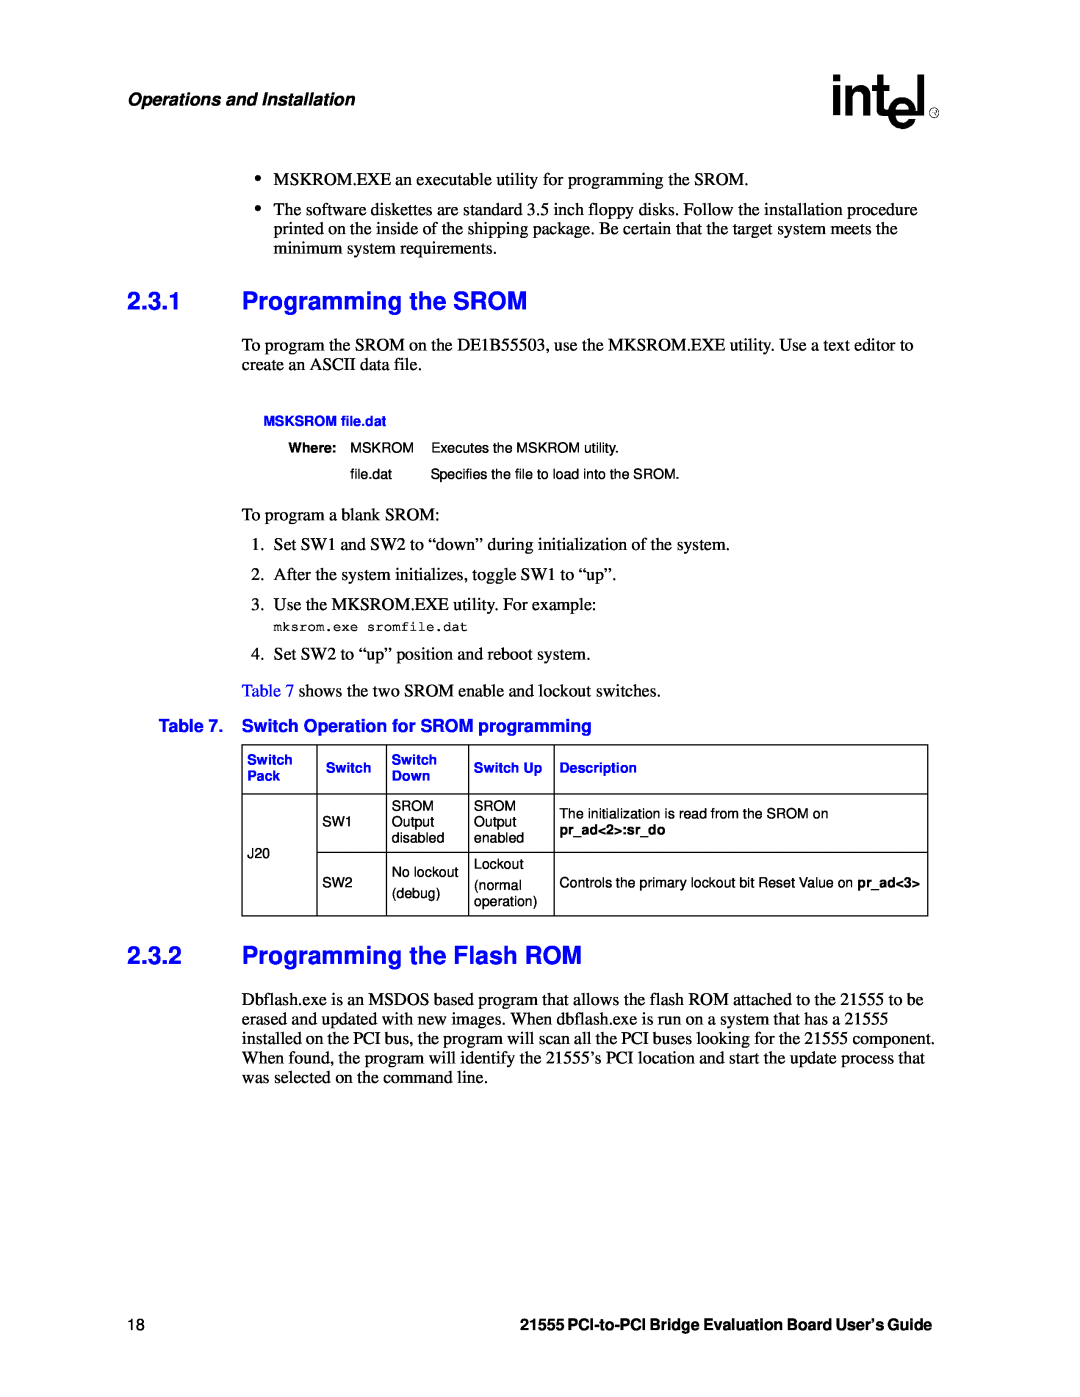 Intel 21555 manual Programming the SROM, Programming the Flash ROM, Operations and Installation 